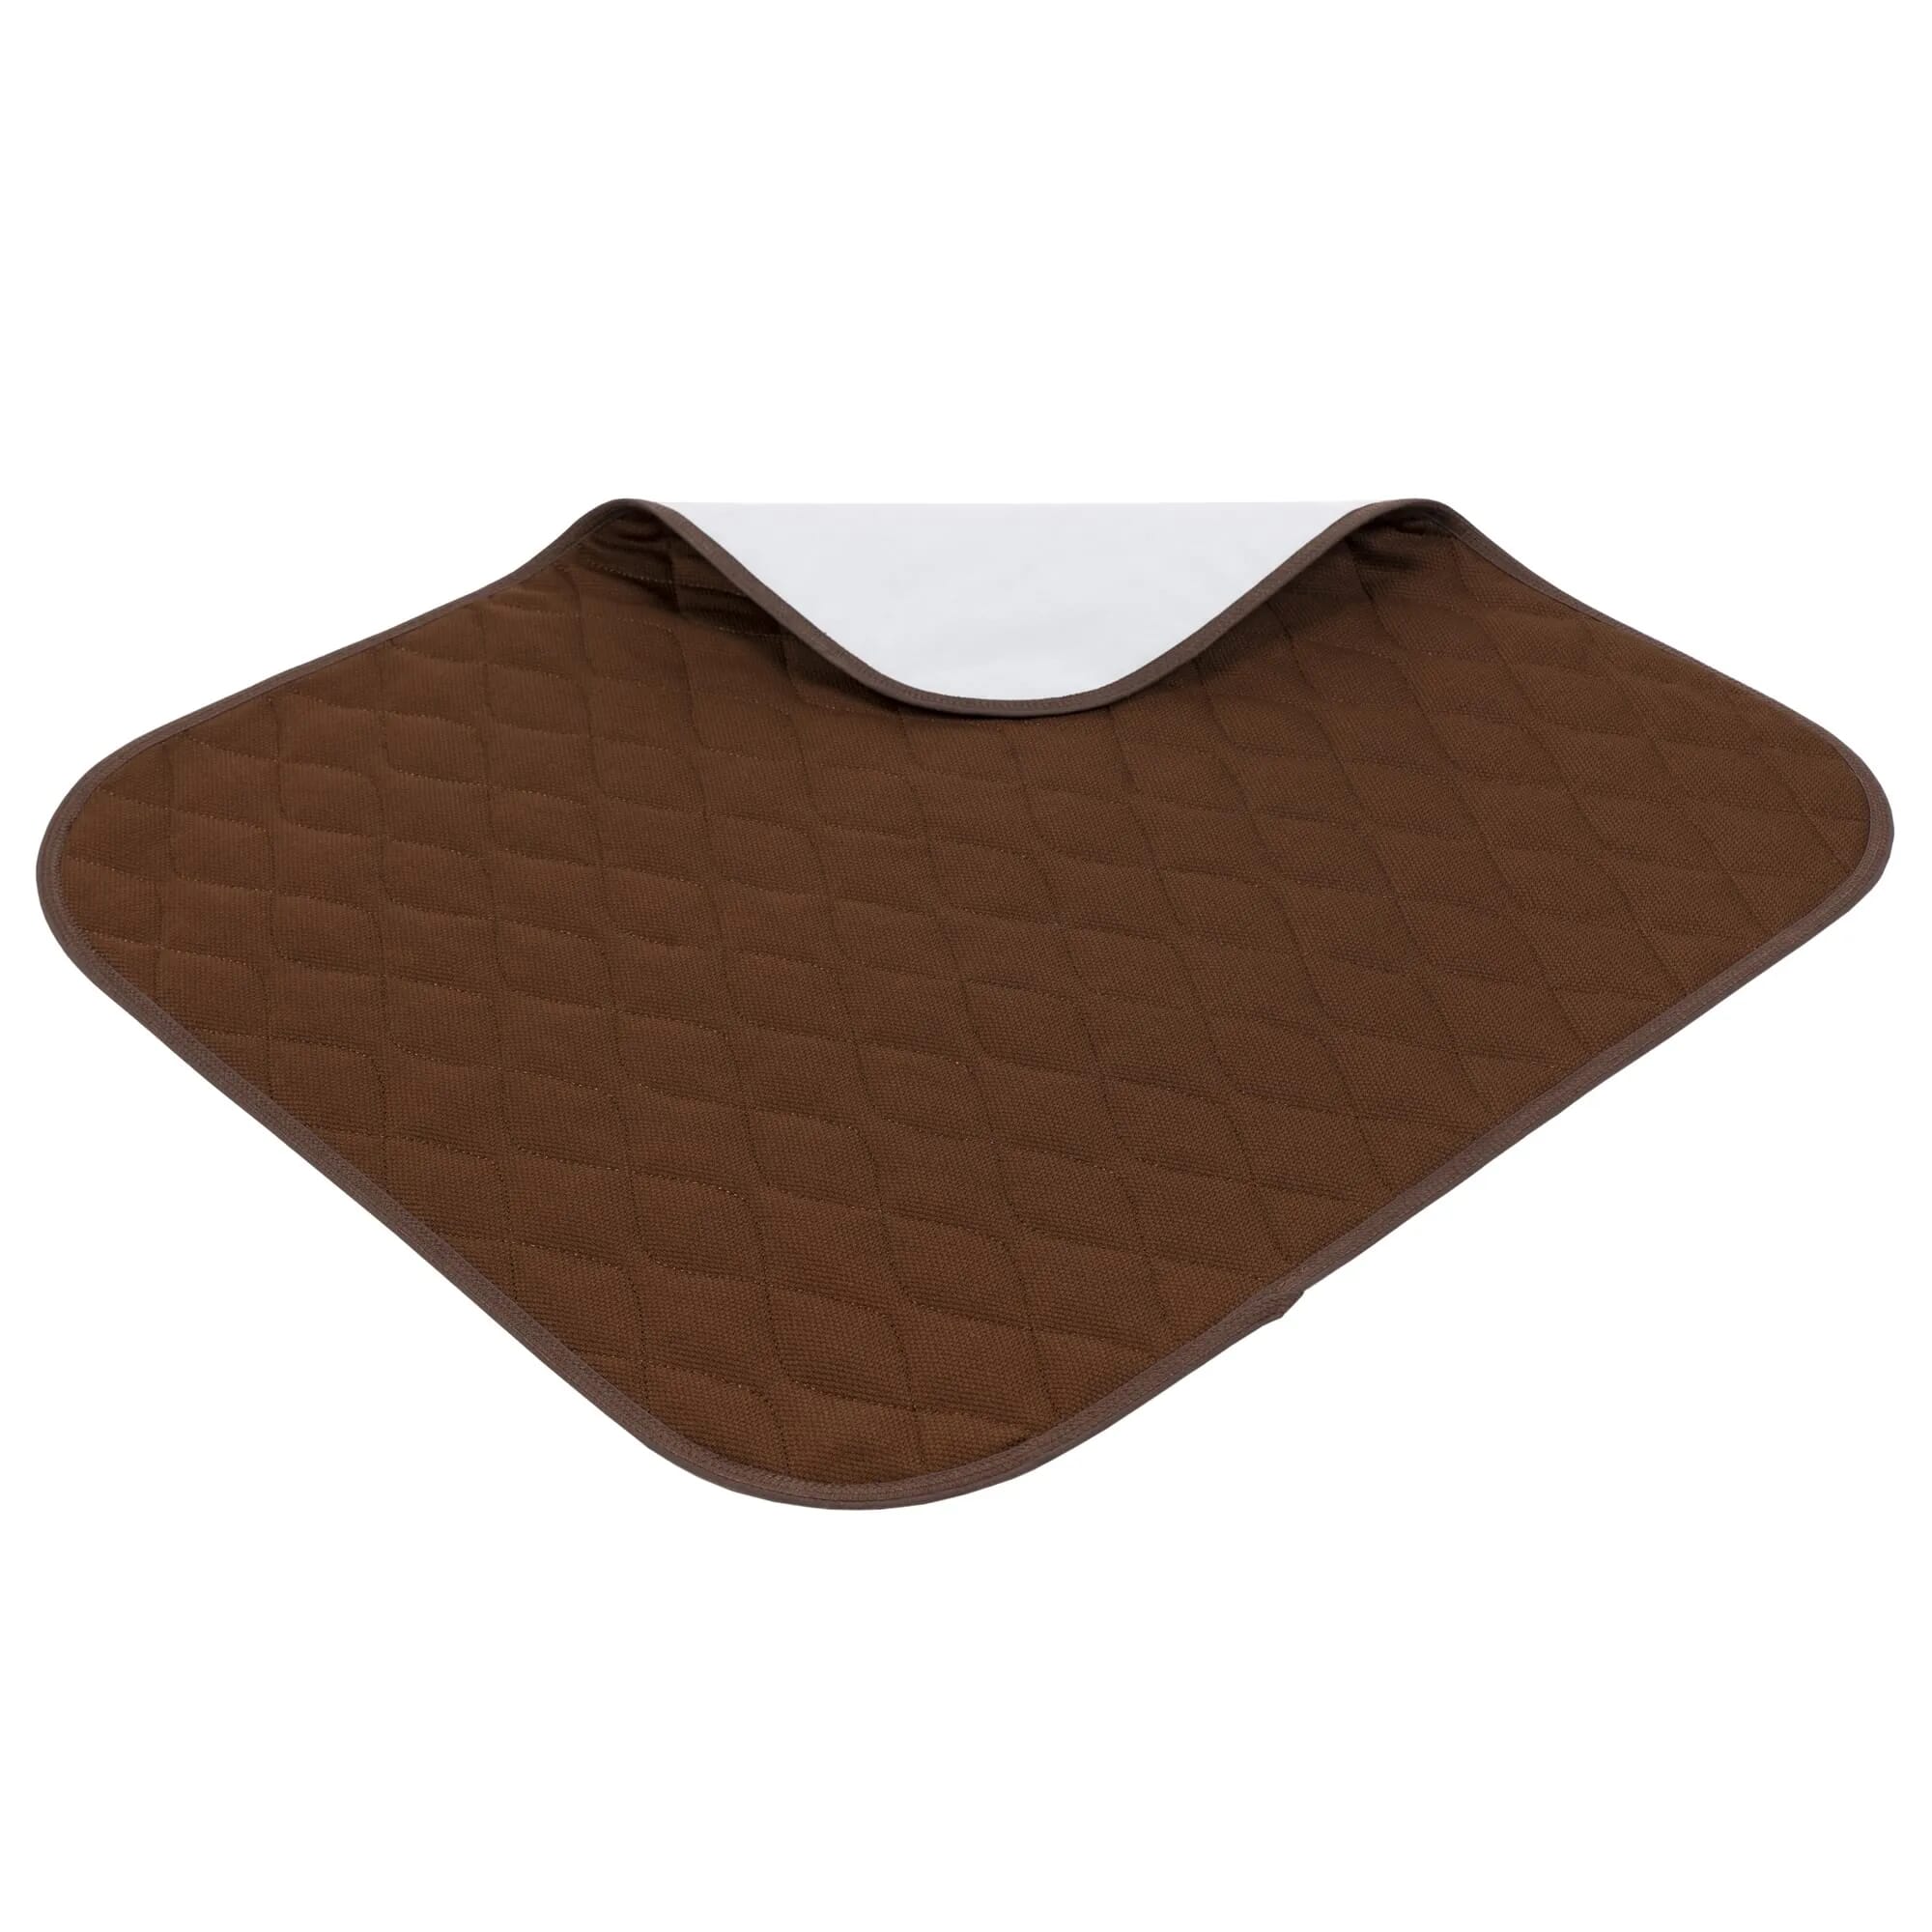 View Washable Chair Pads Brown information